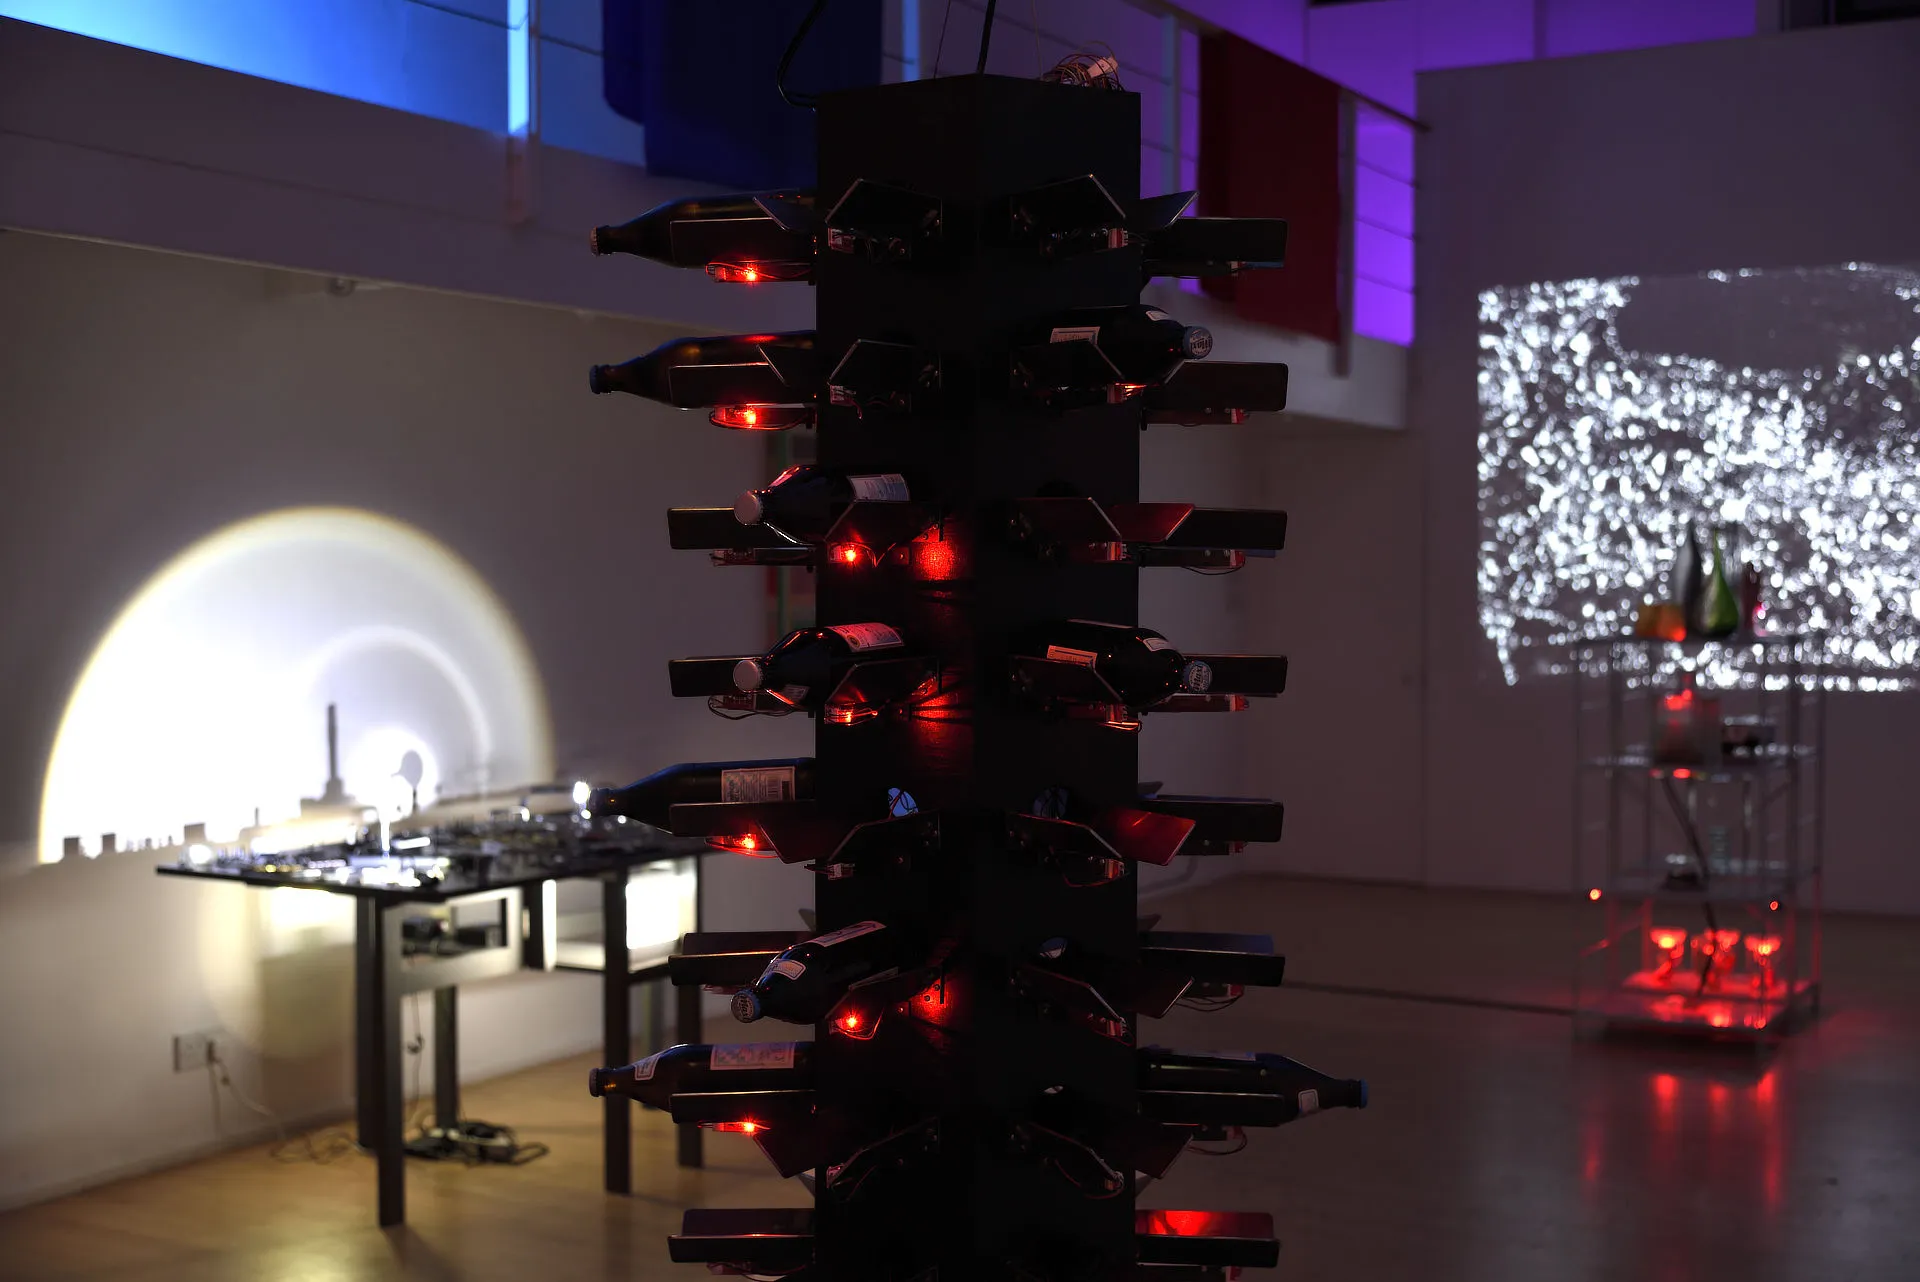 Image of interactive artwork by Tomaž Kramberger, Title: Reconstruction of a Promise, 2019